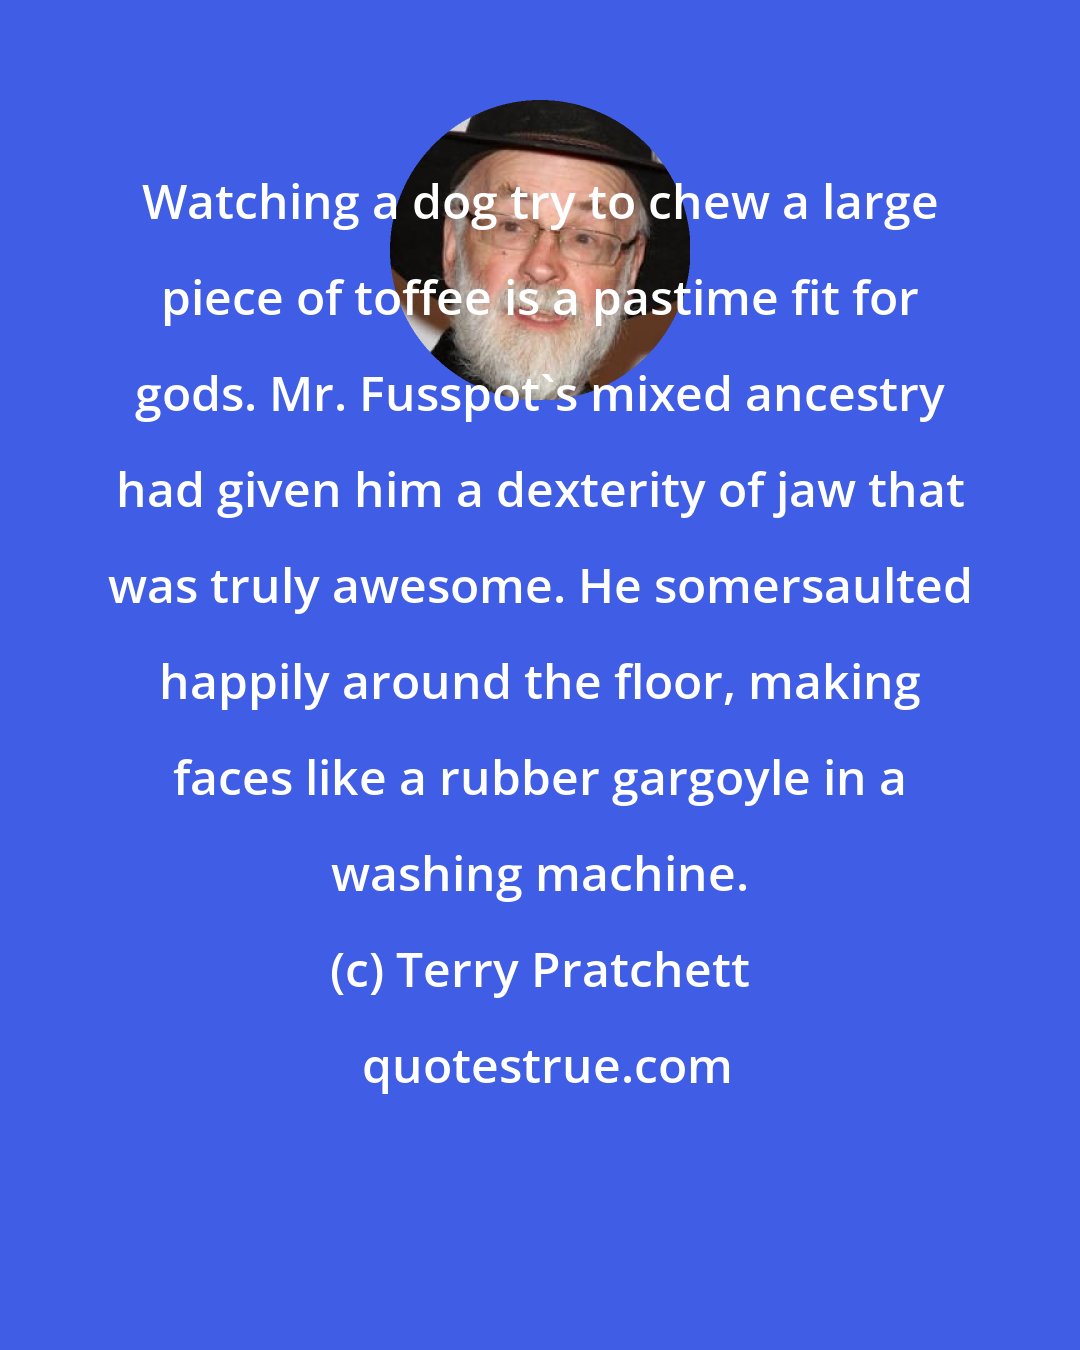 Terry Pratchett: Watching a dog try to chew a large piece of toffee is a pastime fit for gods. Mr. Fusspot's mixed ancestry had given him a dexterity of jaw that was truly awesome. He somersaulted happily around the floor, making faces like a rubber gargoyle in a washing machine.